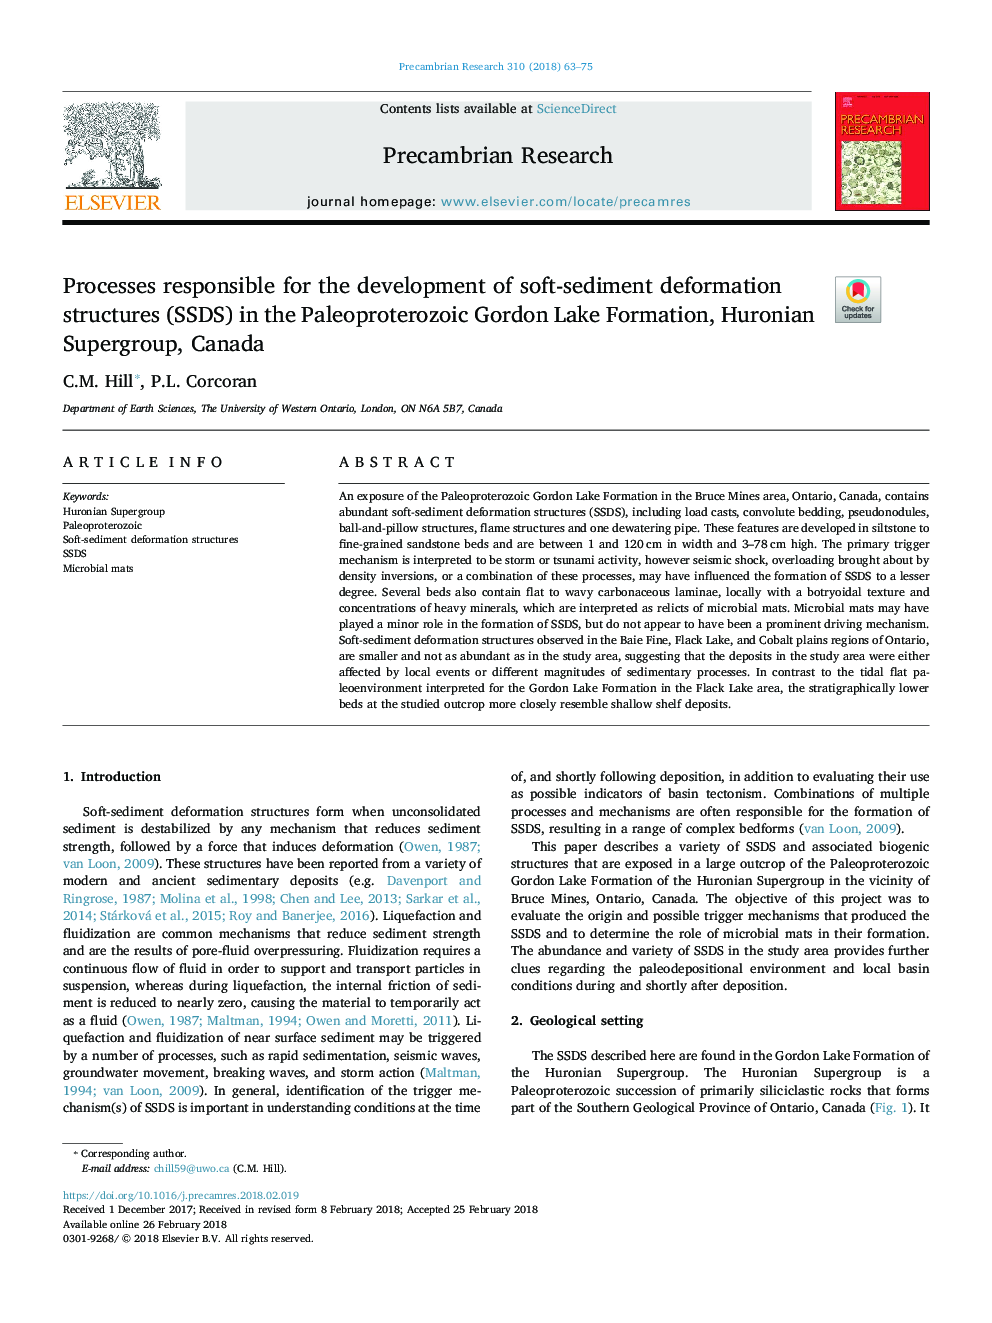 Processes responsible for the development of soft-sediment deformation structures (SSDS) in the Paleoproterozoic Gordon Lake Formation, Huronian Supergroup, Canada